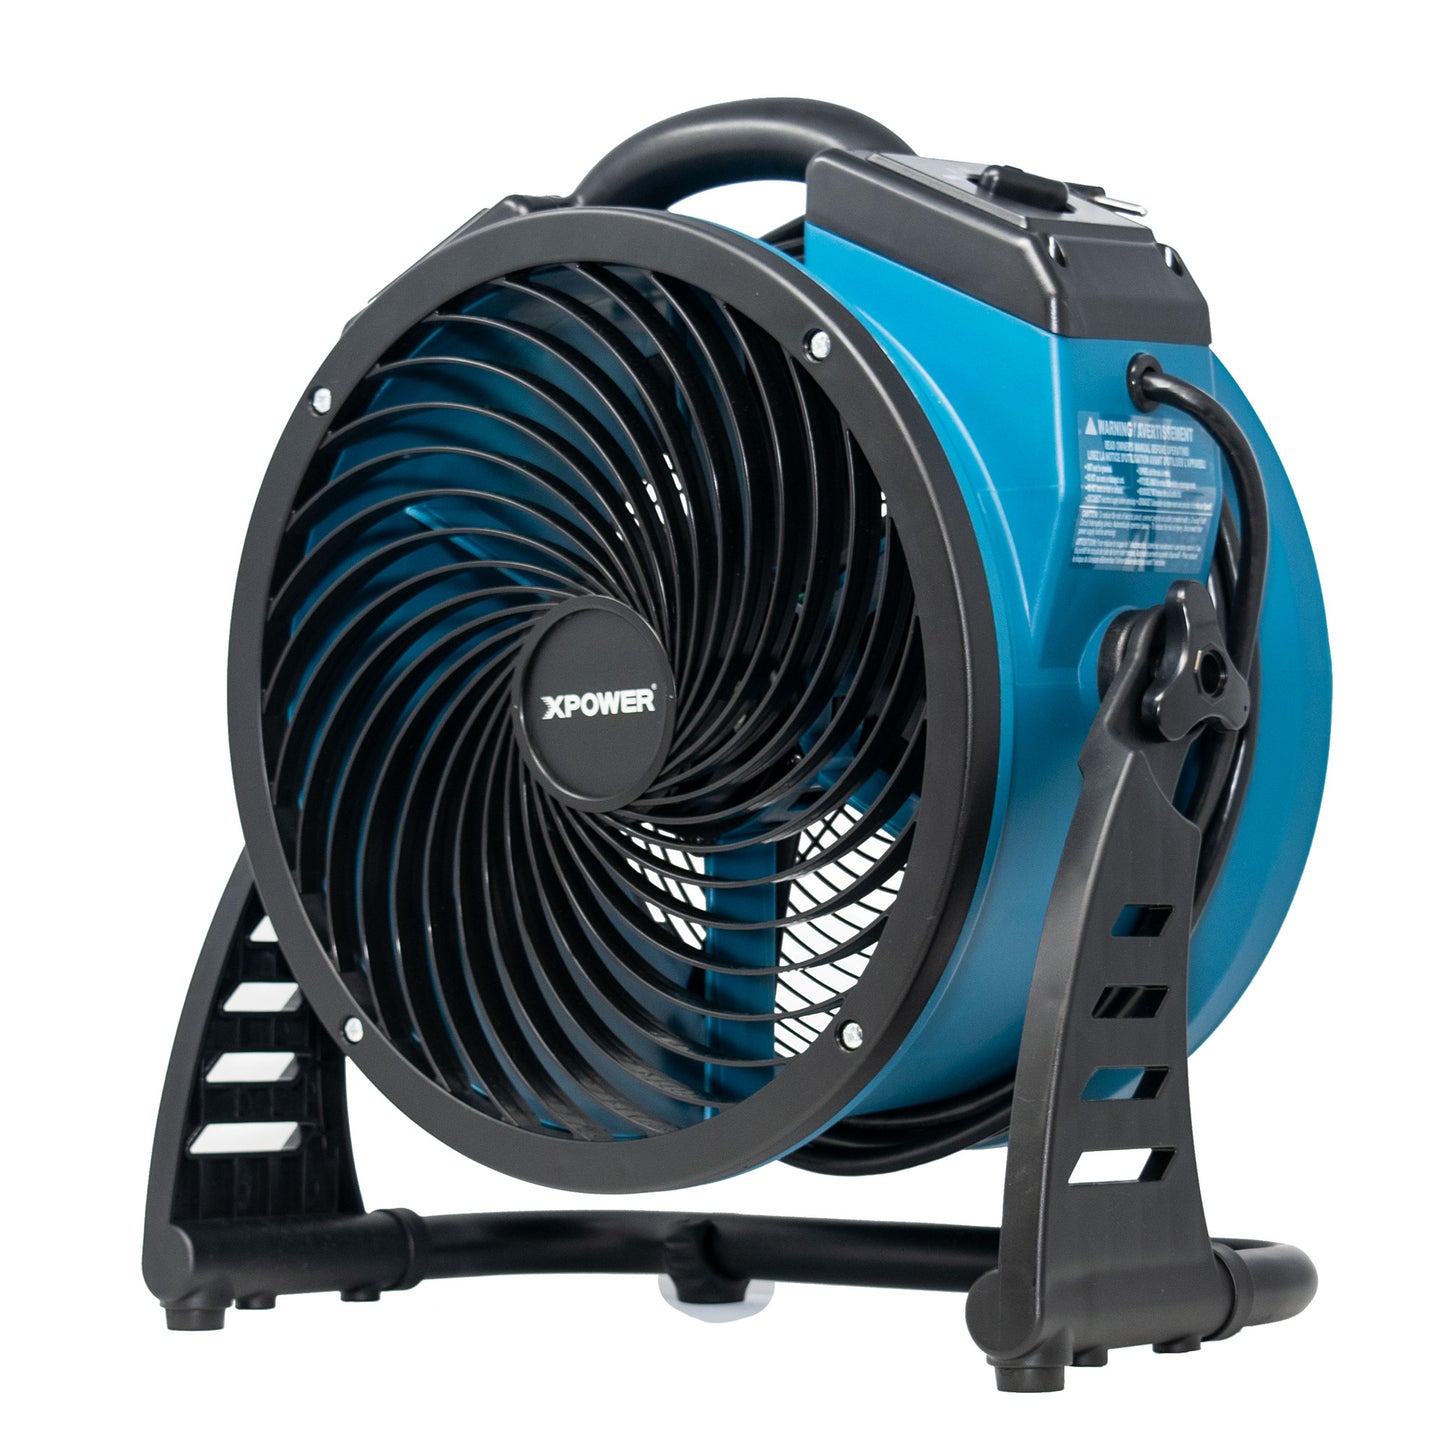 XPOWER FC-250AD Pro 13” Brushless DC Motor Air Circulator with Power Outlets